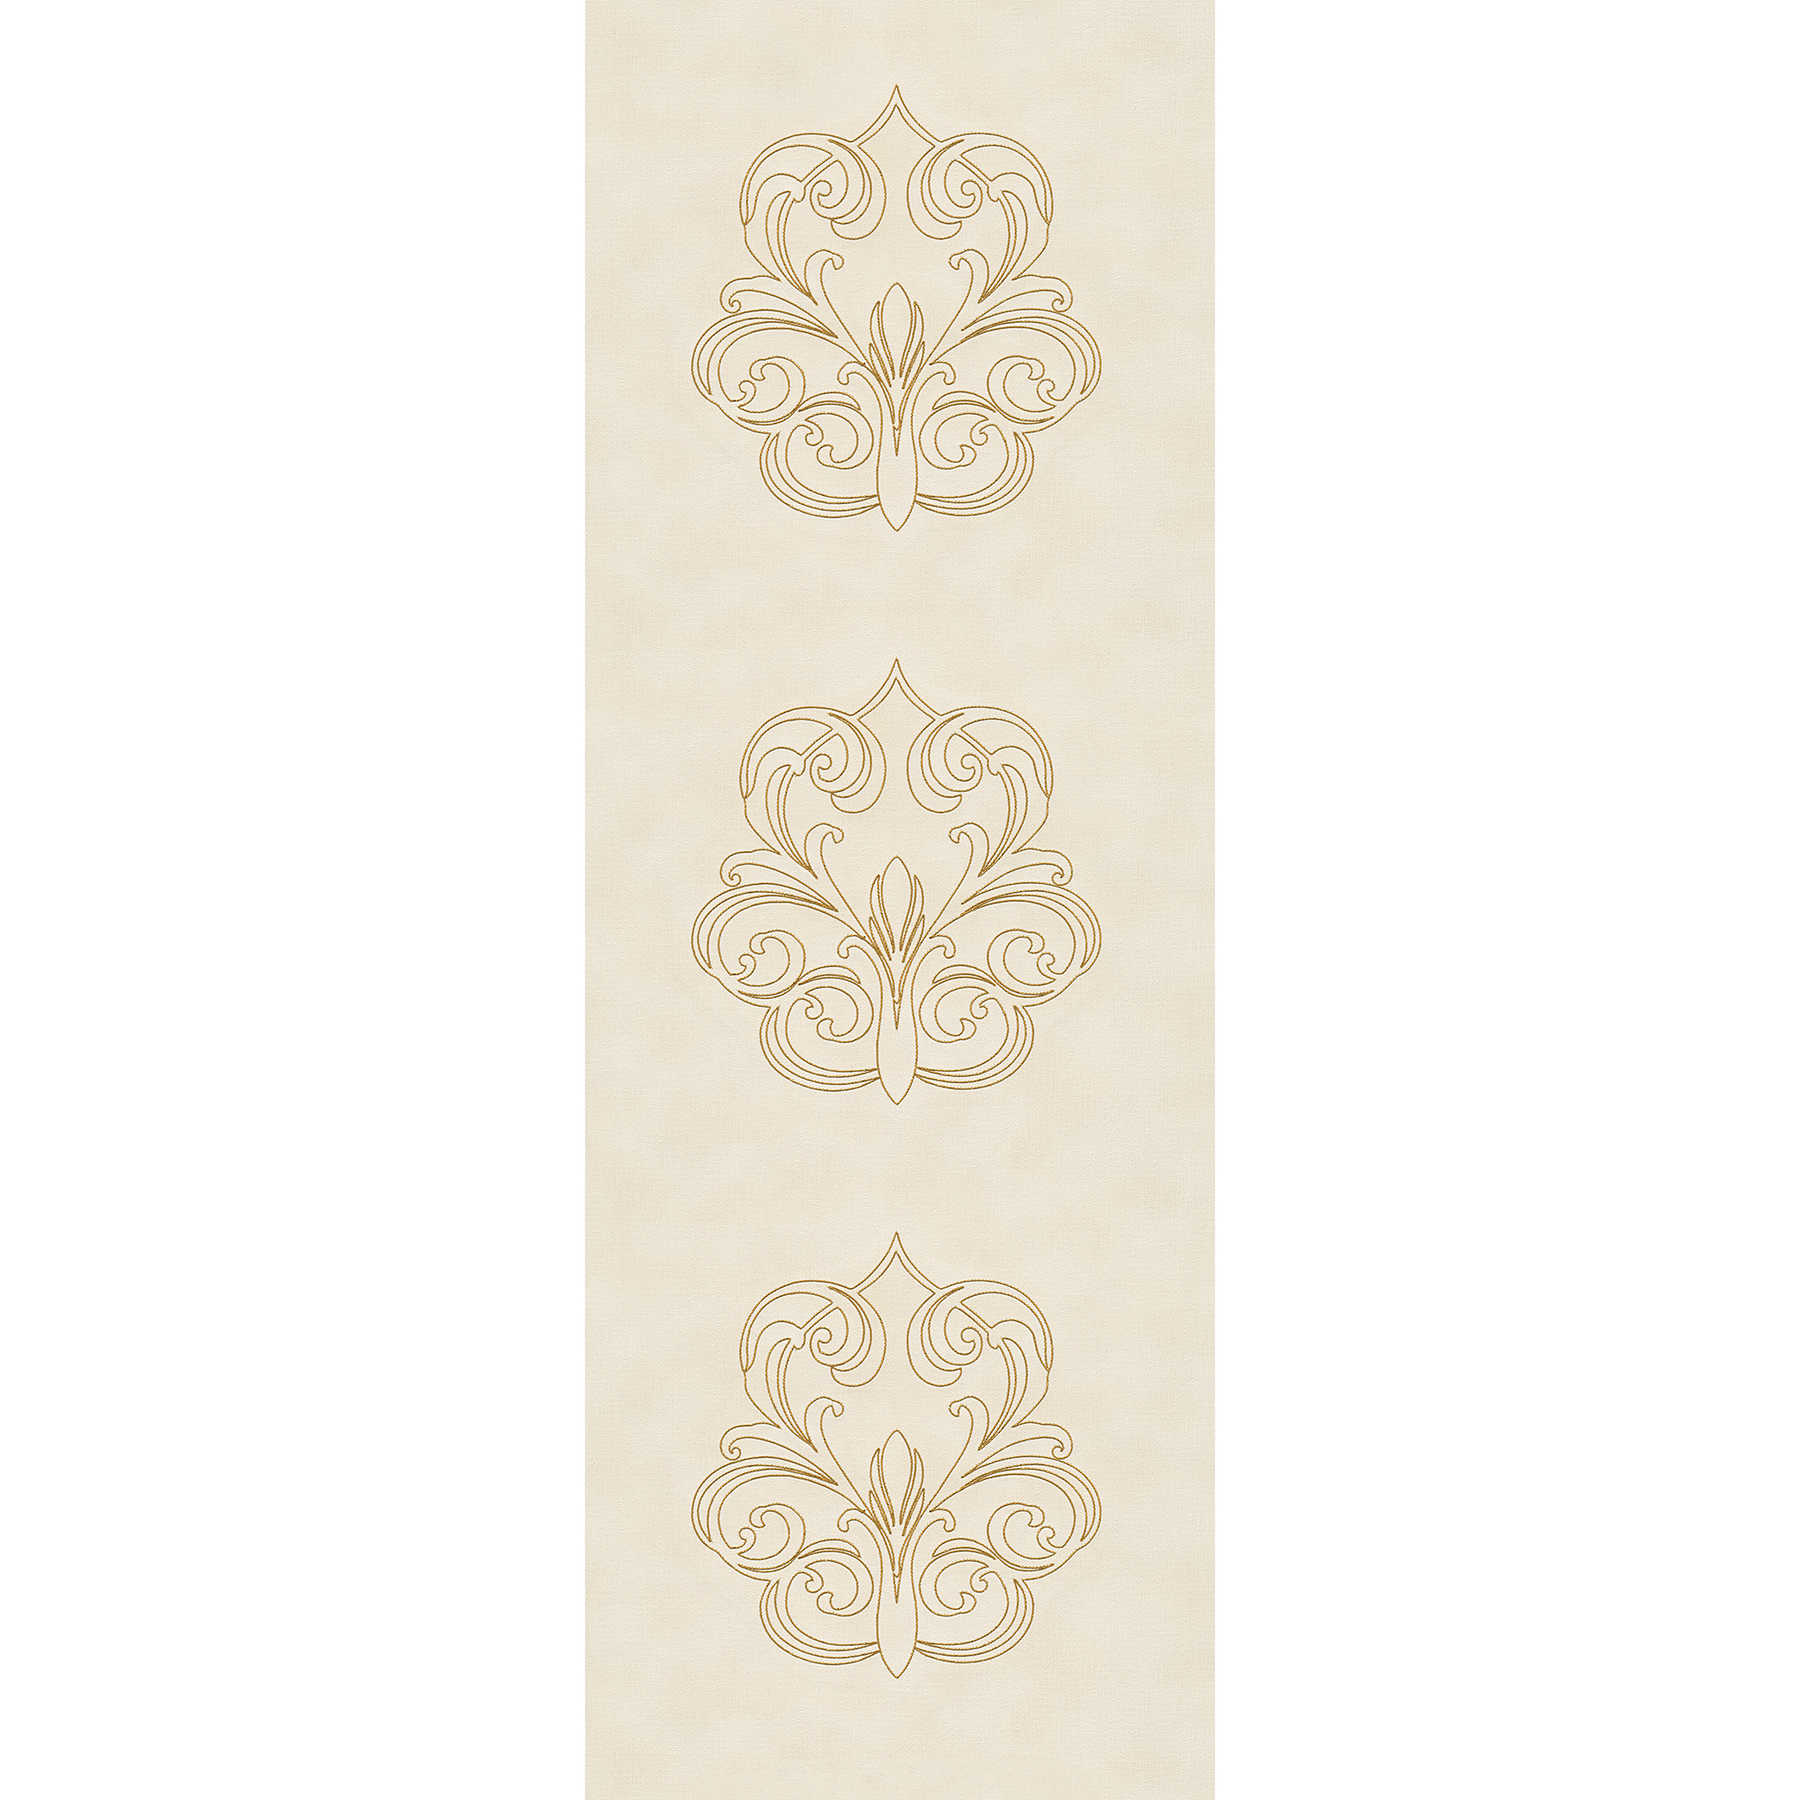         Premium wall panel with ornaments on textile structure - cream, gold
    